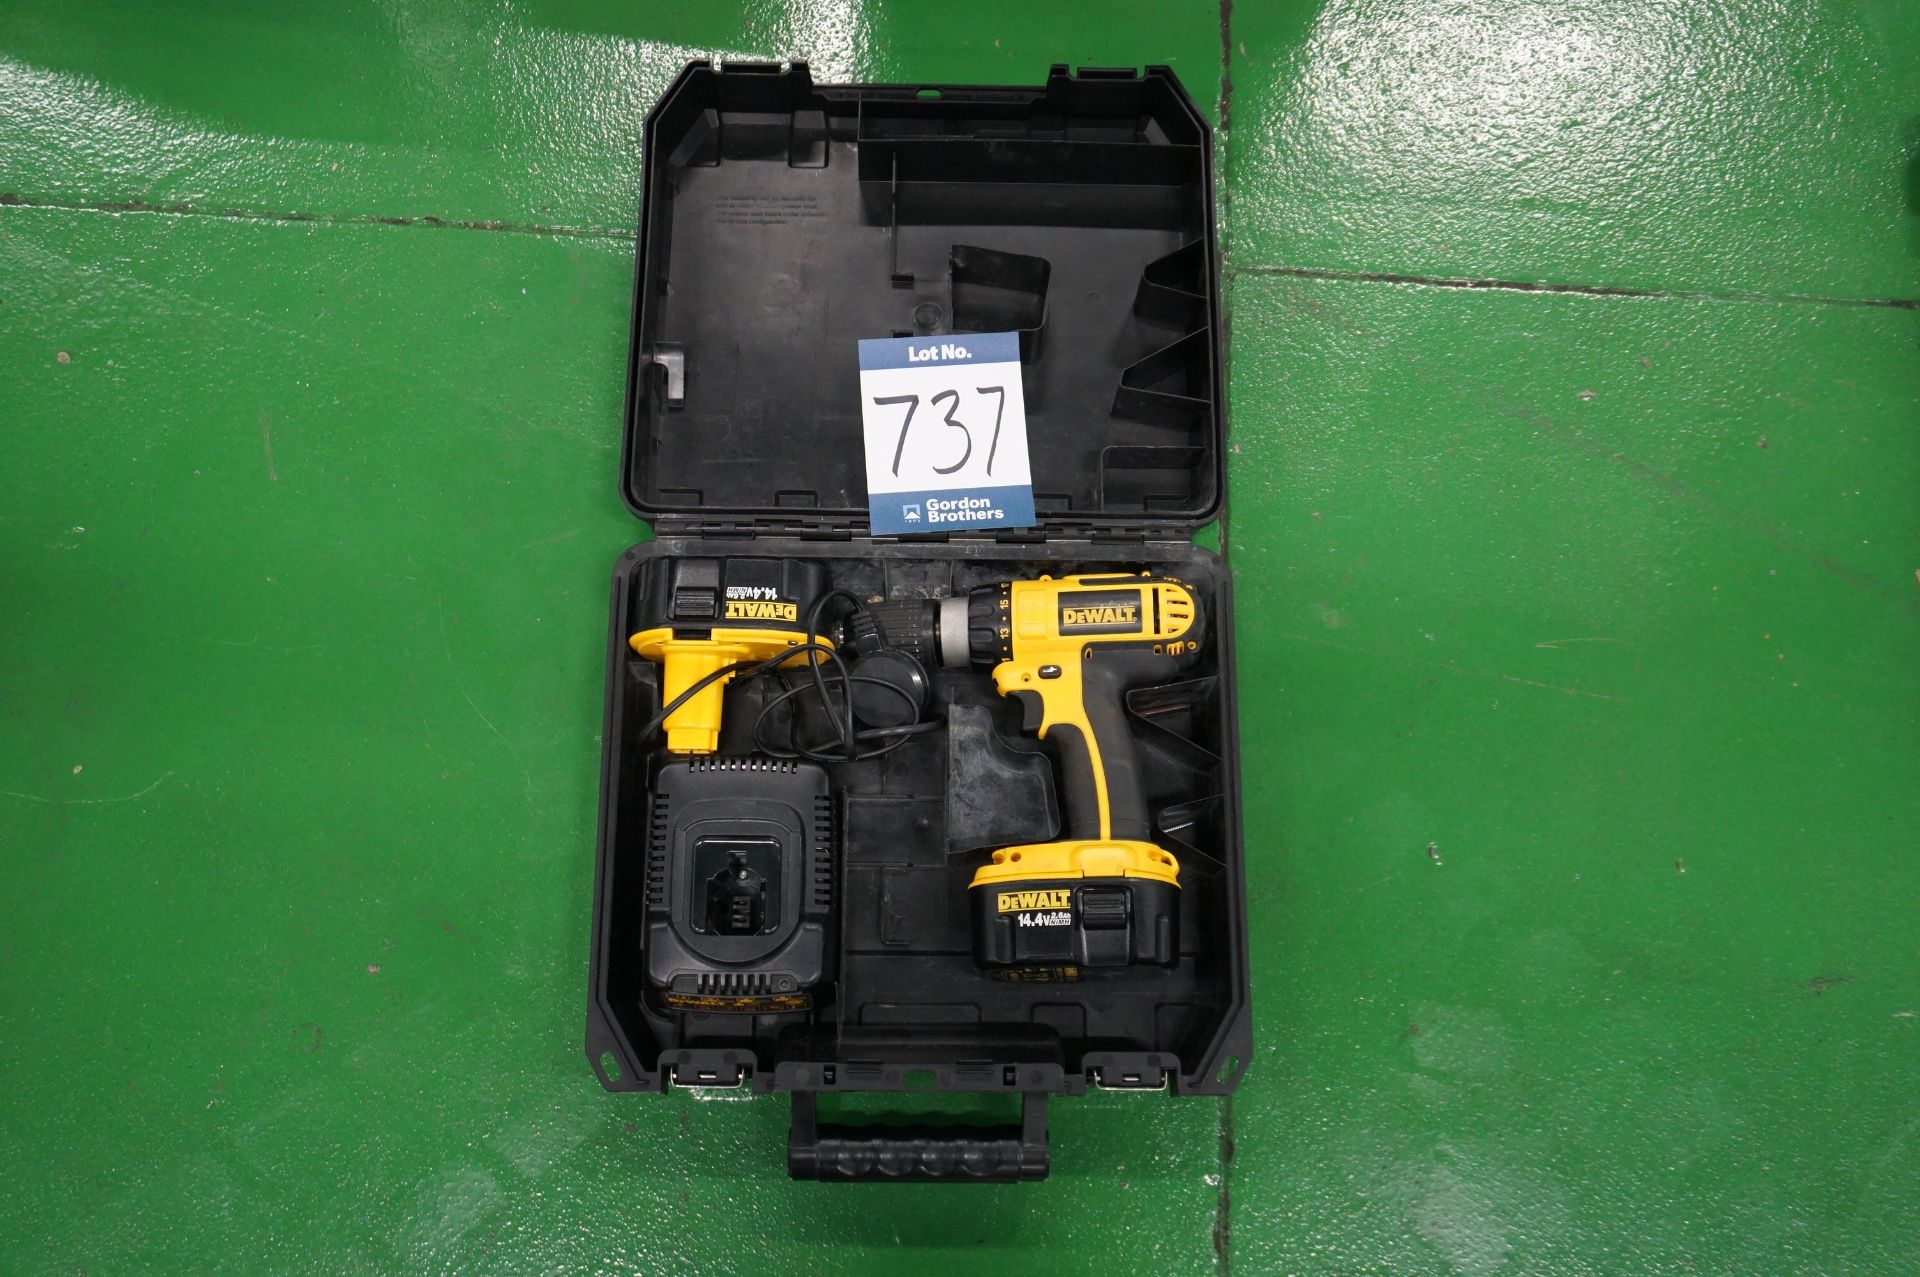 Dewalt unknown model cordless hand drill with charging dock, spare battery and carry case